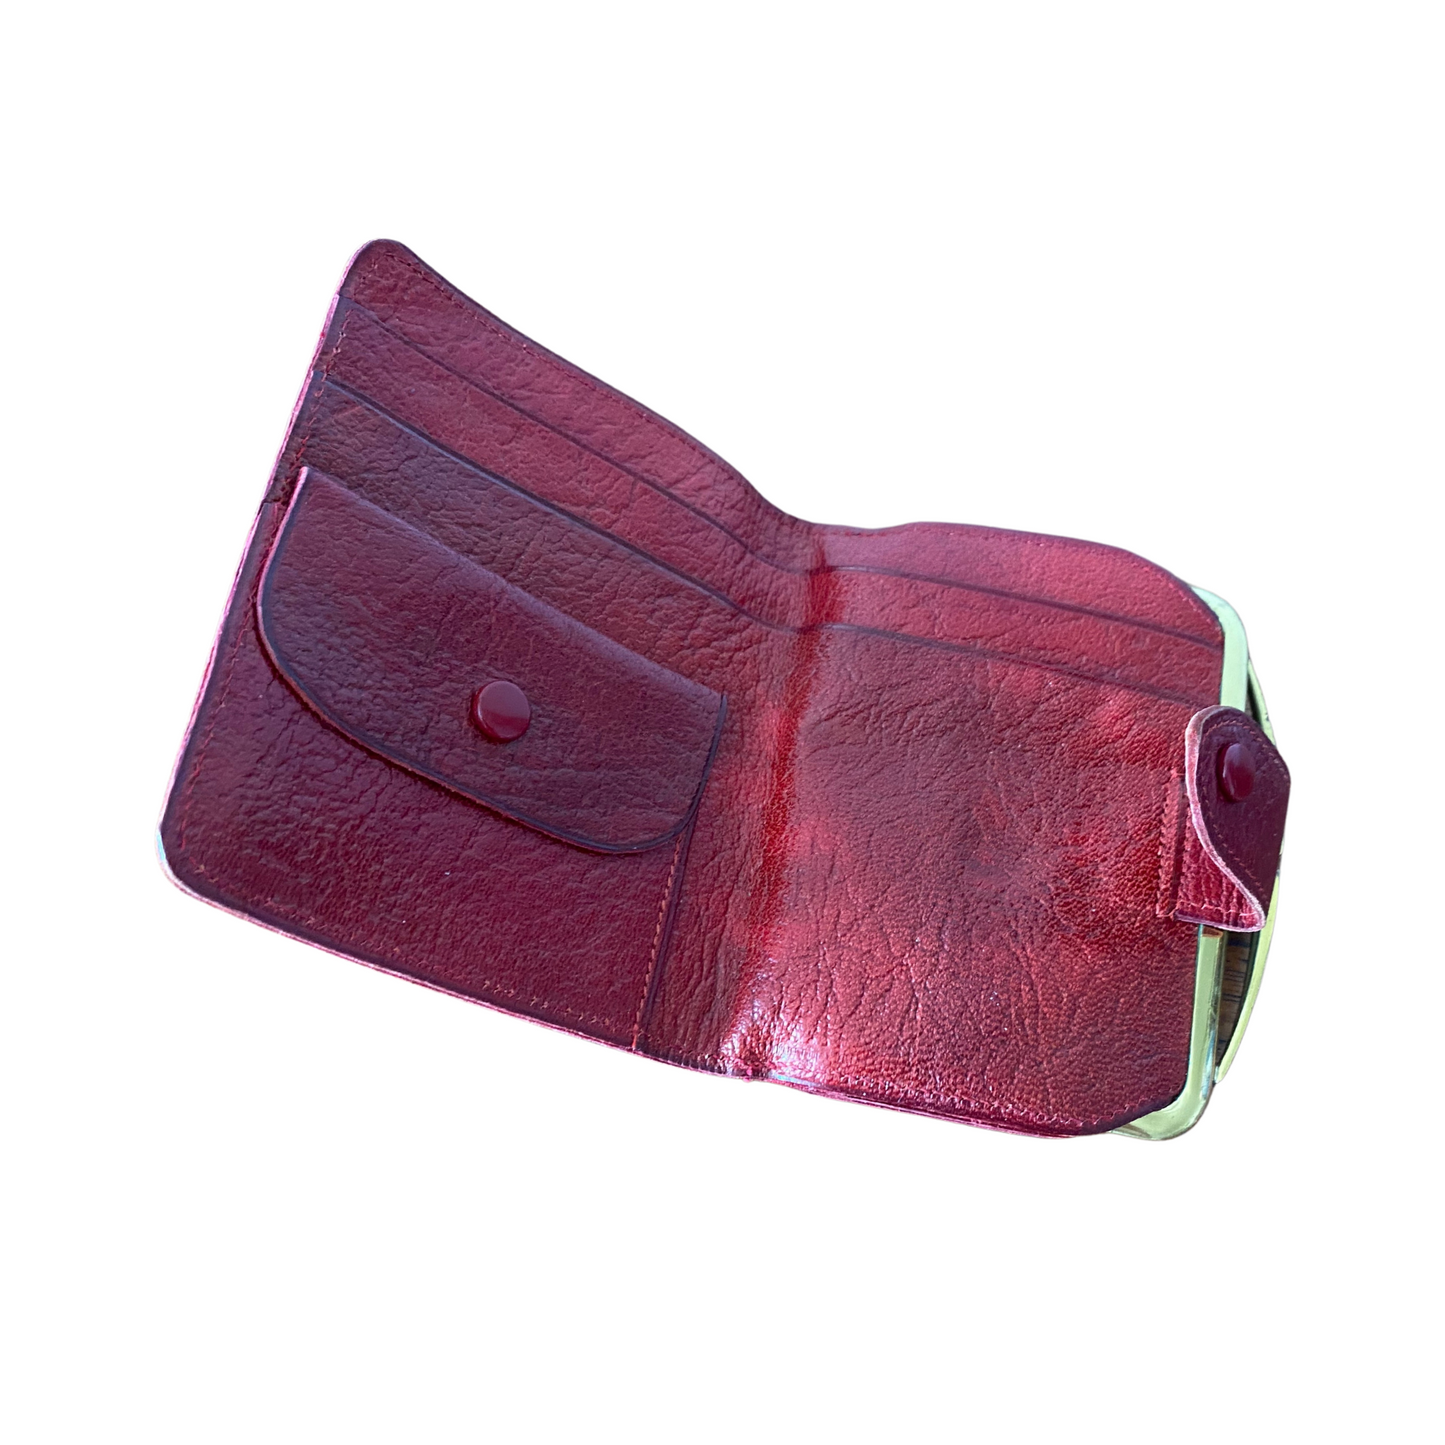 Vintage 1960s Red Leather Clasp Top Purse/Wallet - Stylish and Practical